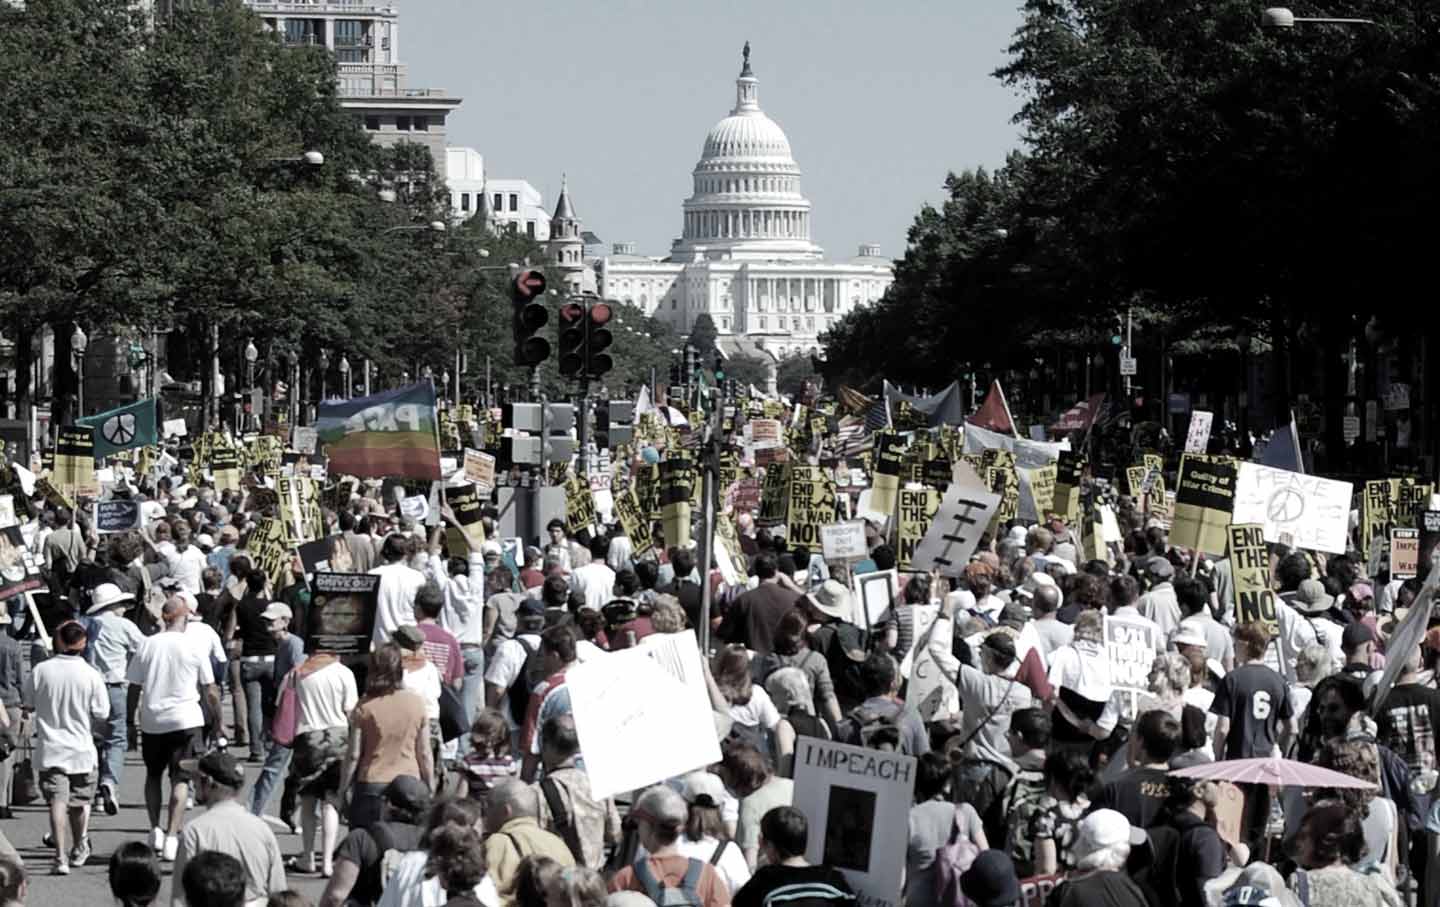 Nearly 100,000 demonstrators march during an antiwar protest at the United States Capitol, Washington, DC, September 15, 2007. (CC by-SA 2.0)